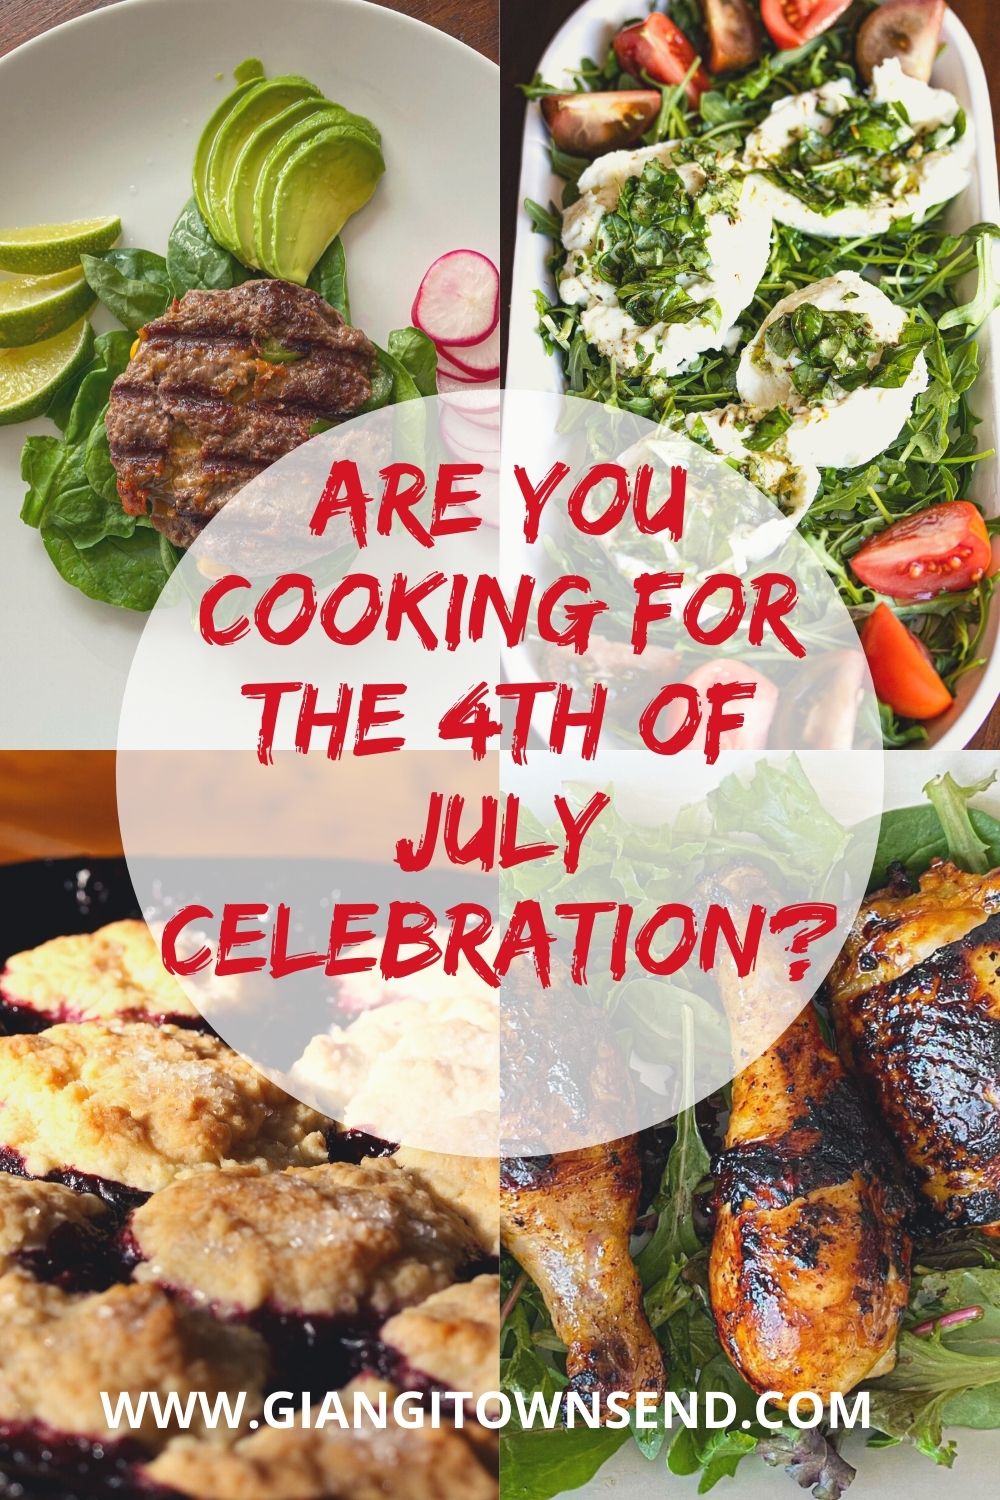 Are You Cooking For The 4th of July Celebration?